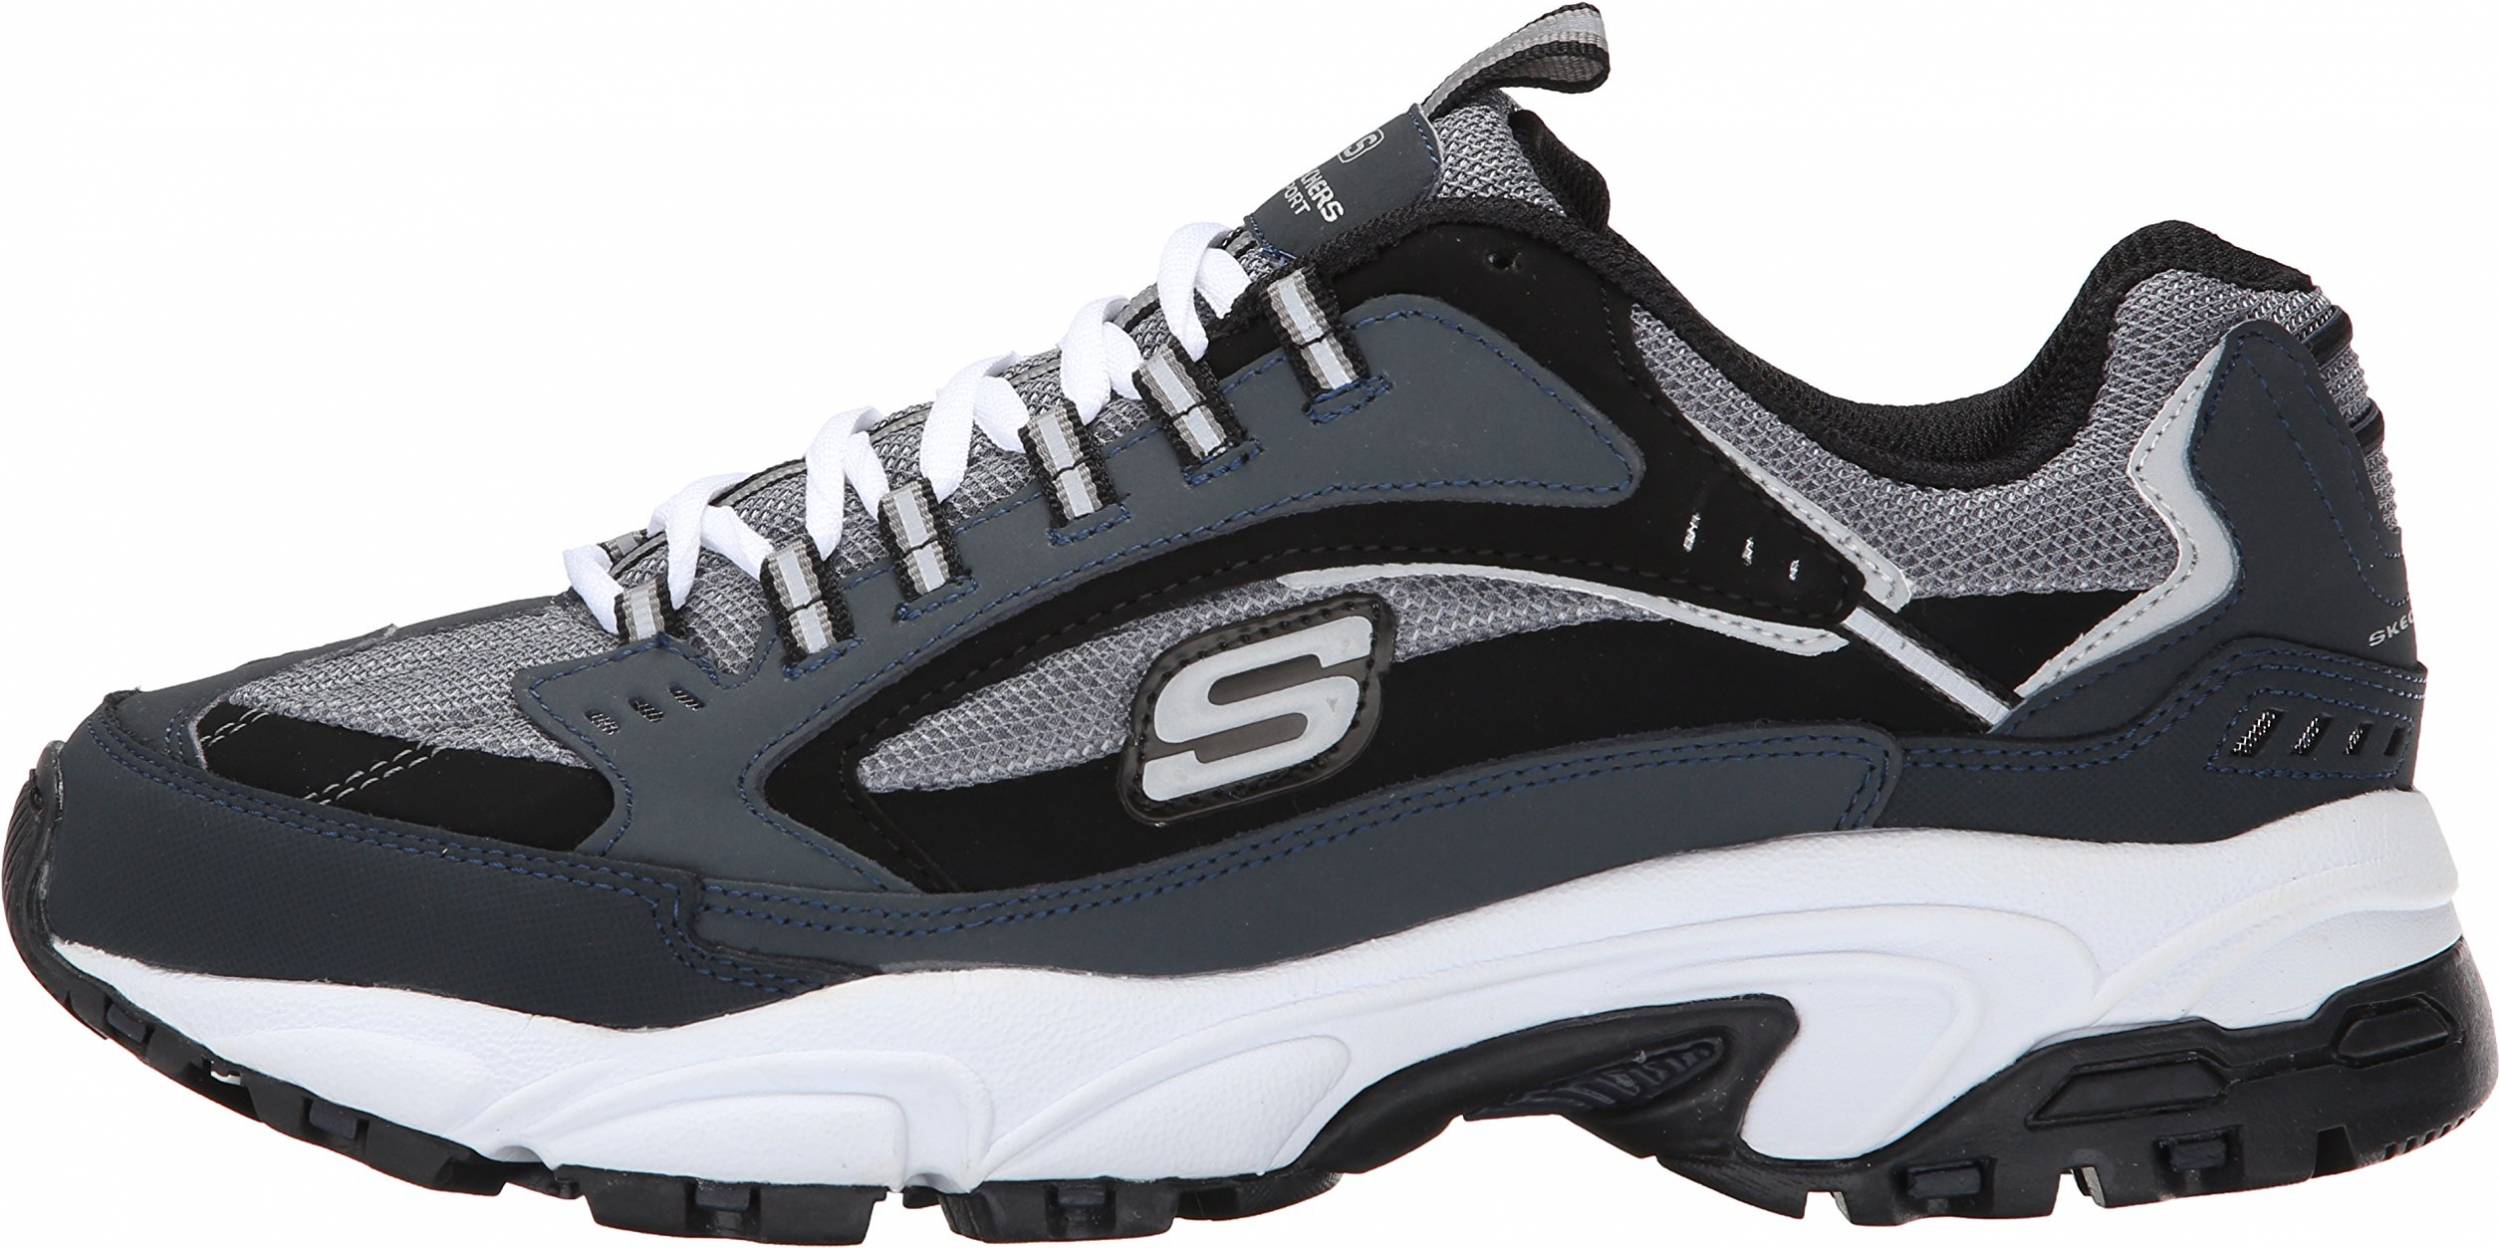 are skechers good for working out